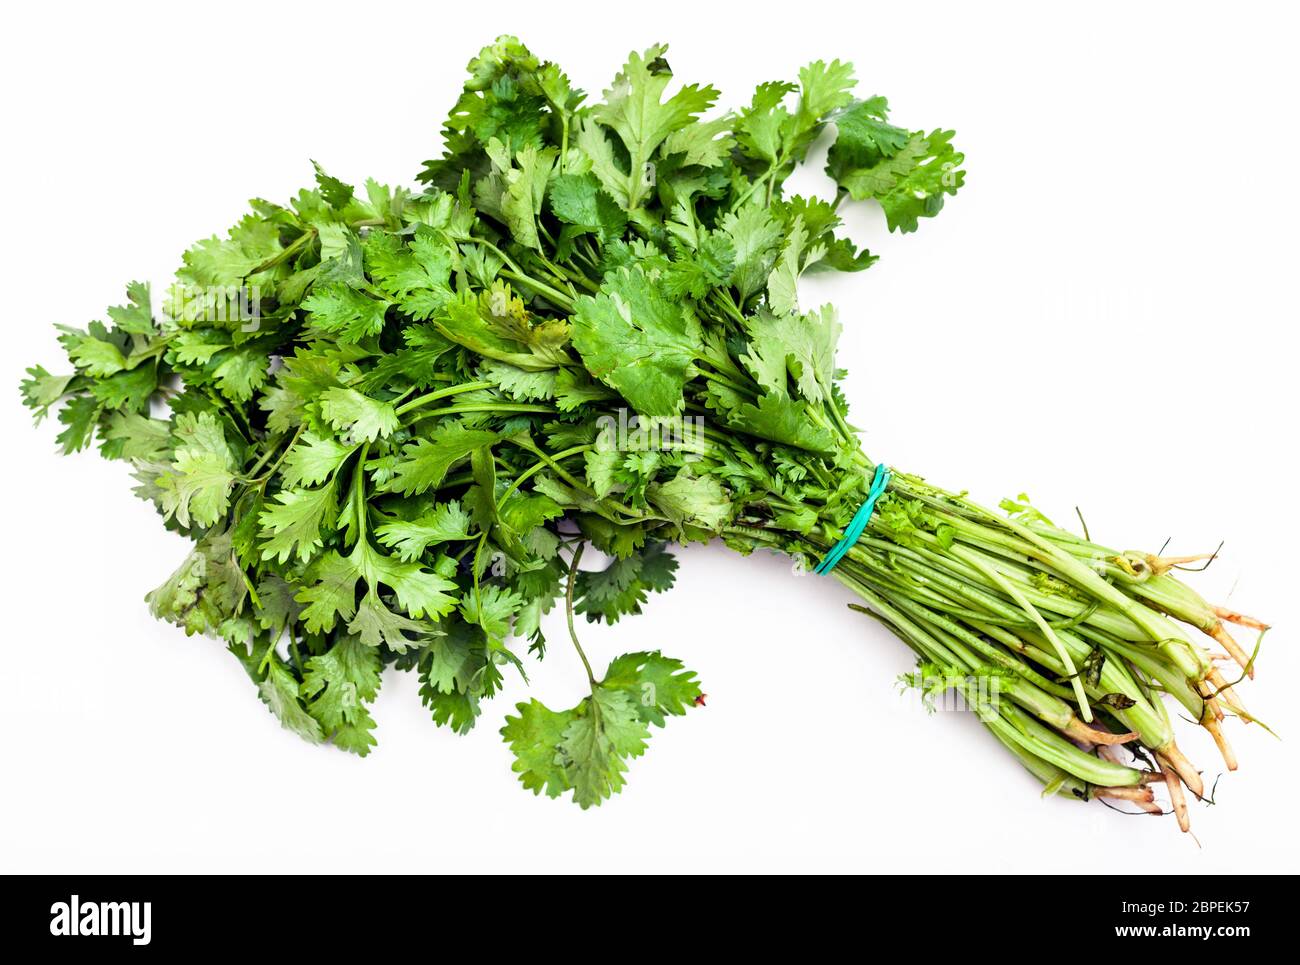 bunch of fresh cut green cilantro herb on white background Stock Photo